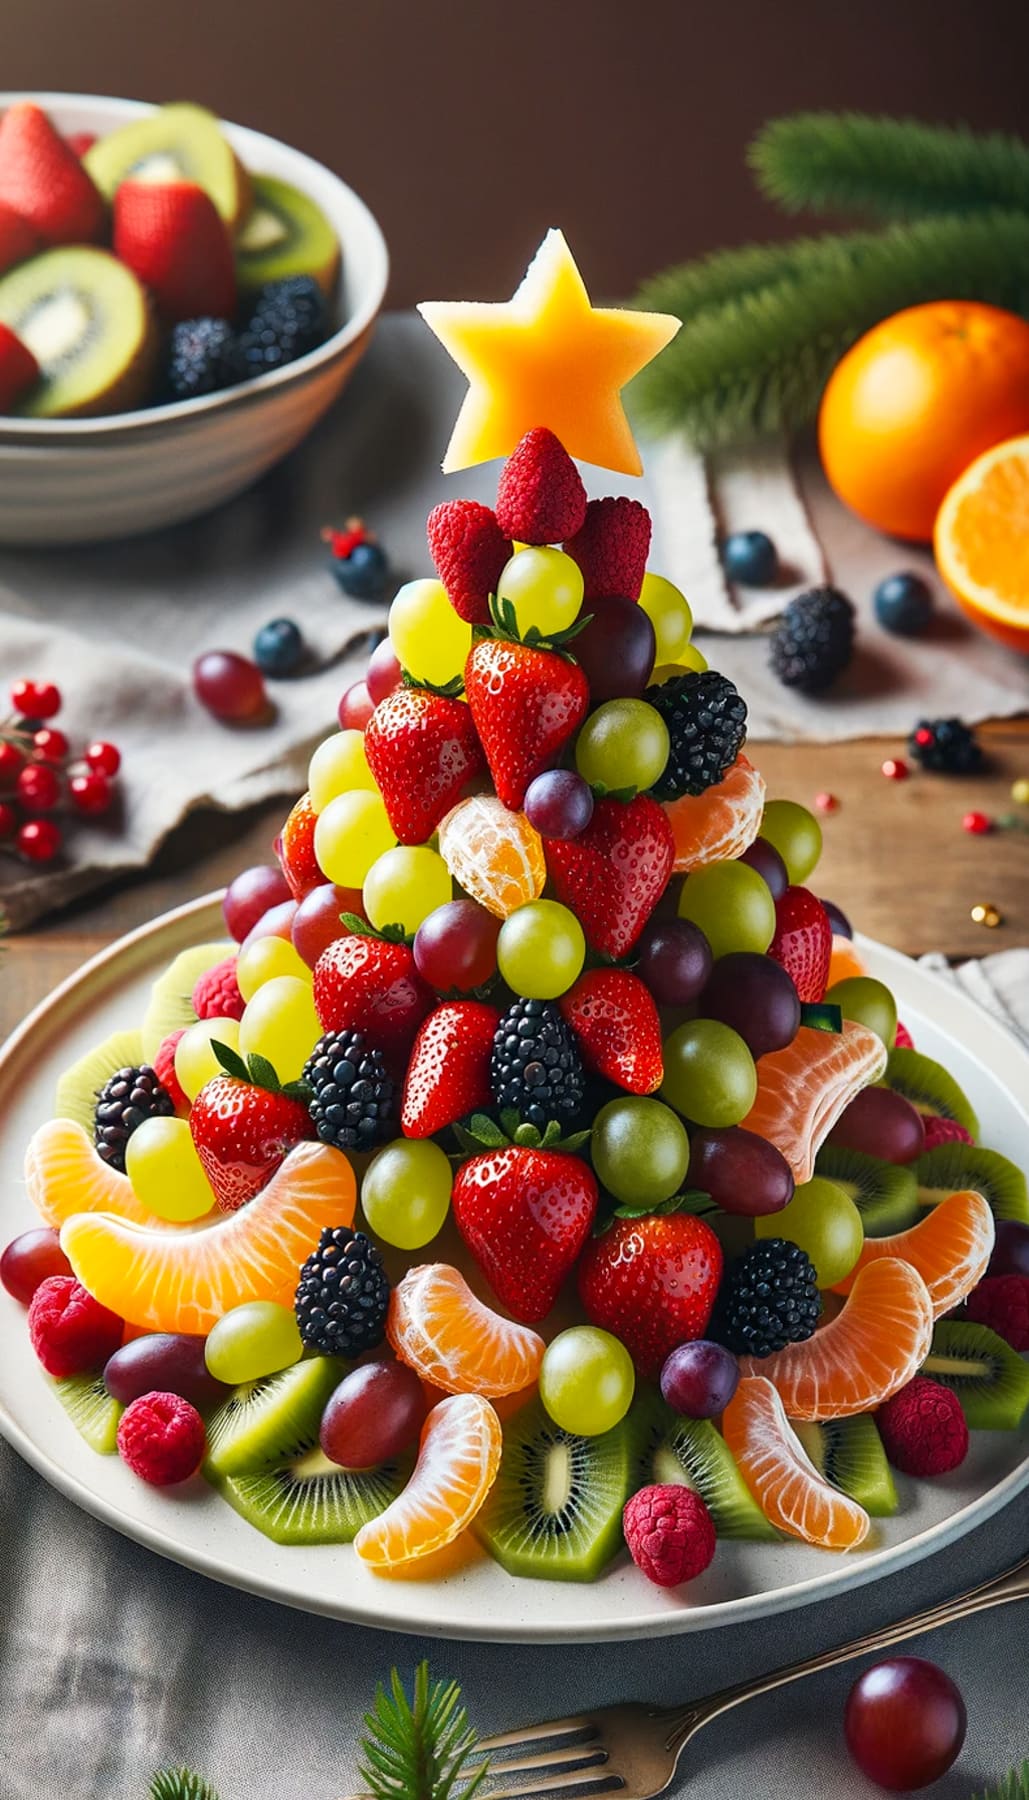 Christmas tree made of fruits and topped with a star cut out of a melon.